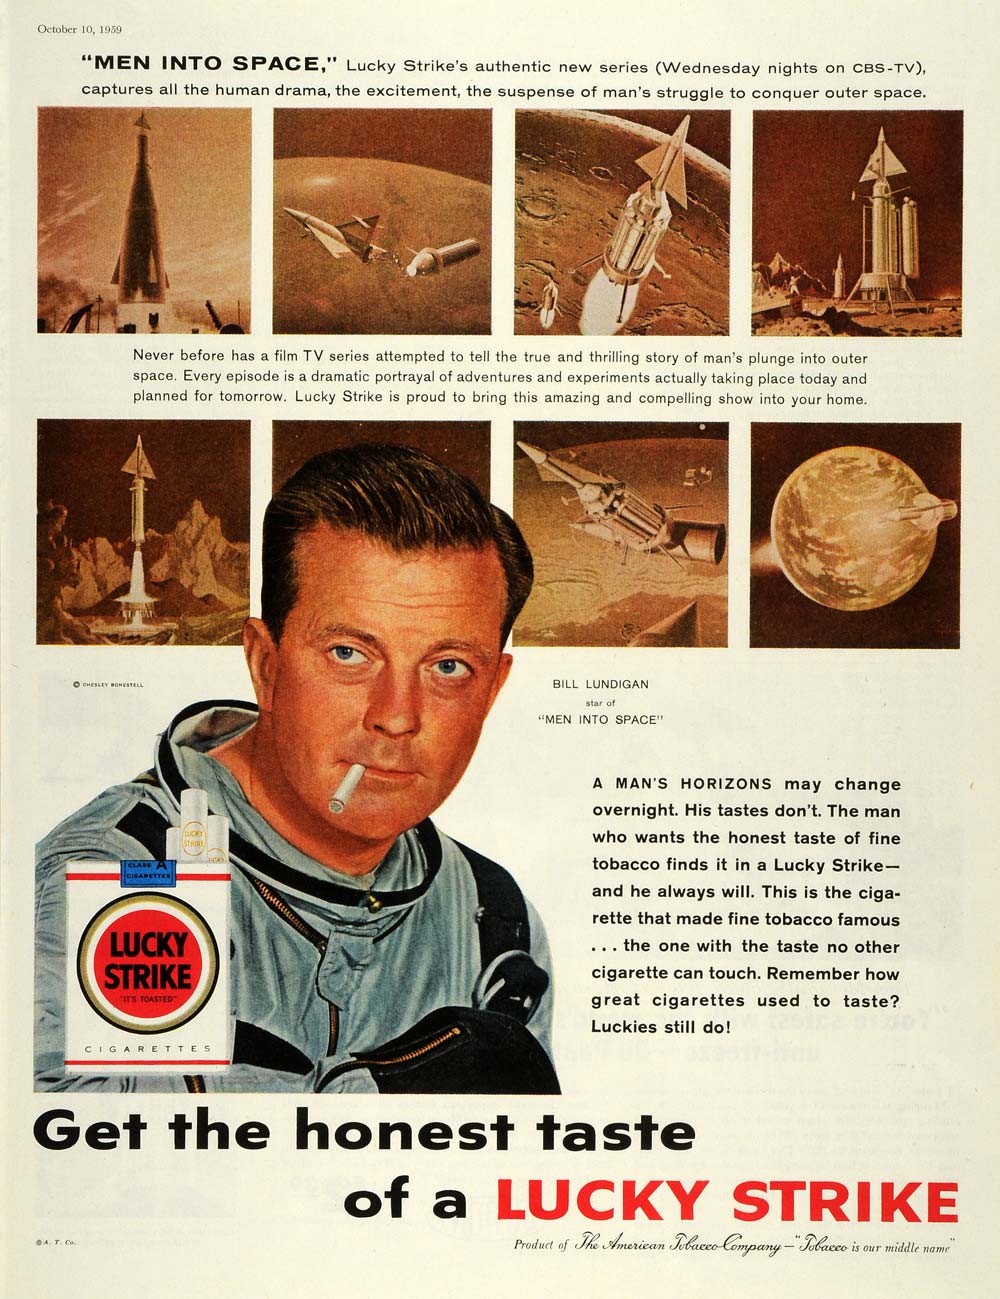 1959 Ad Bill Lundigan Star of Men Into Space Lucky Strike Cigarettes CBS TV SEP5